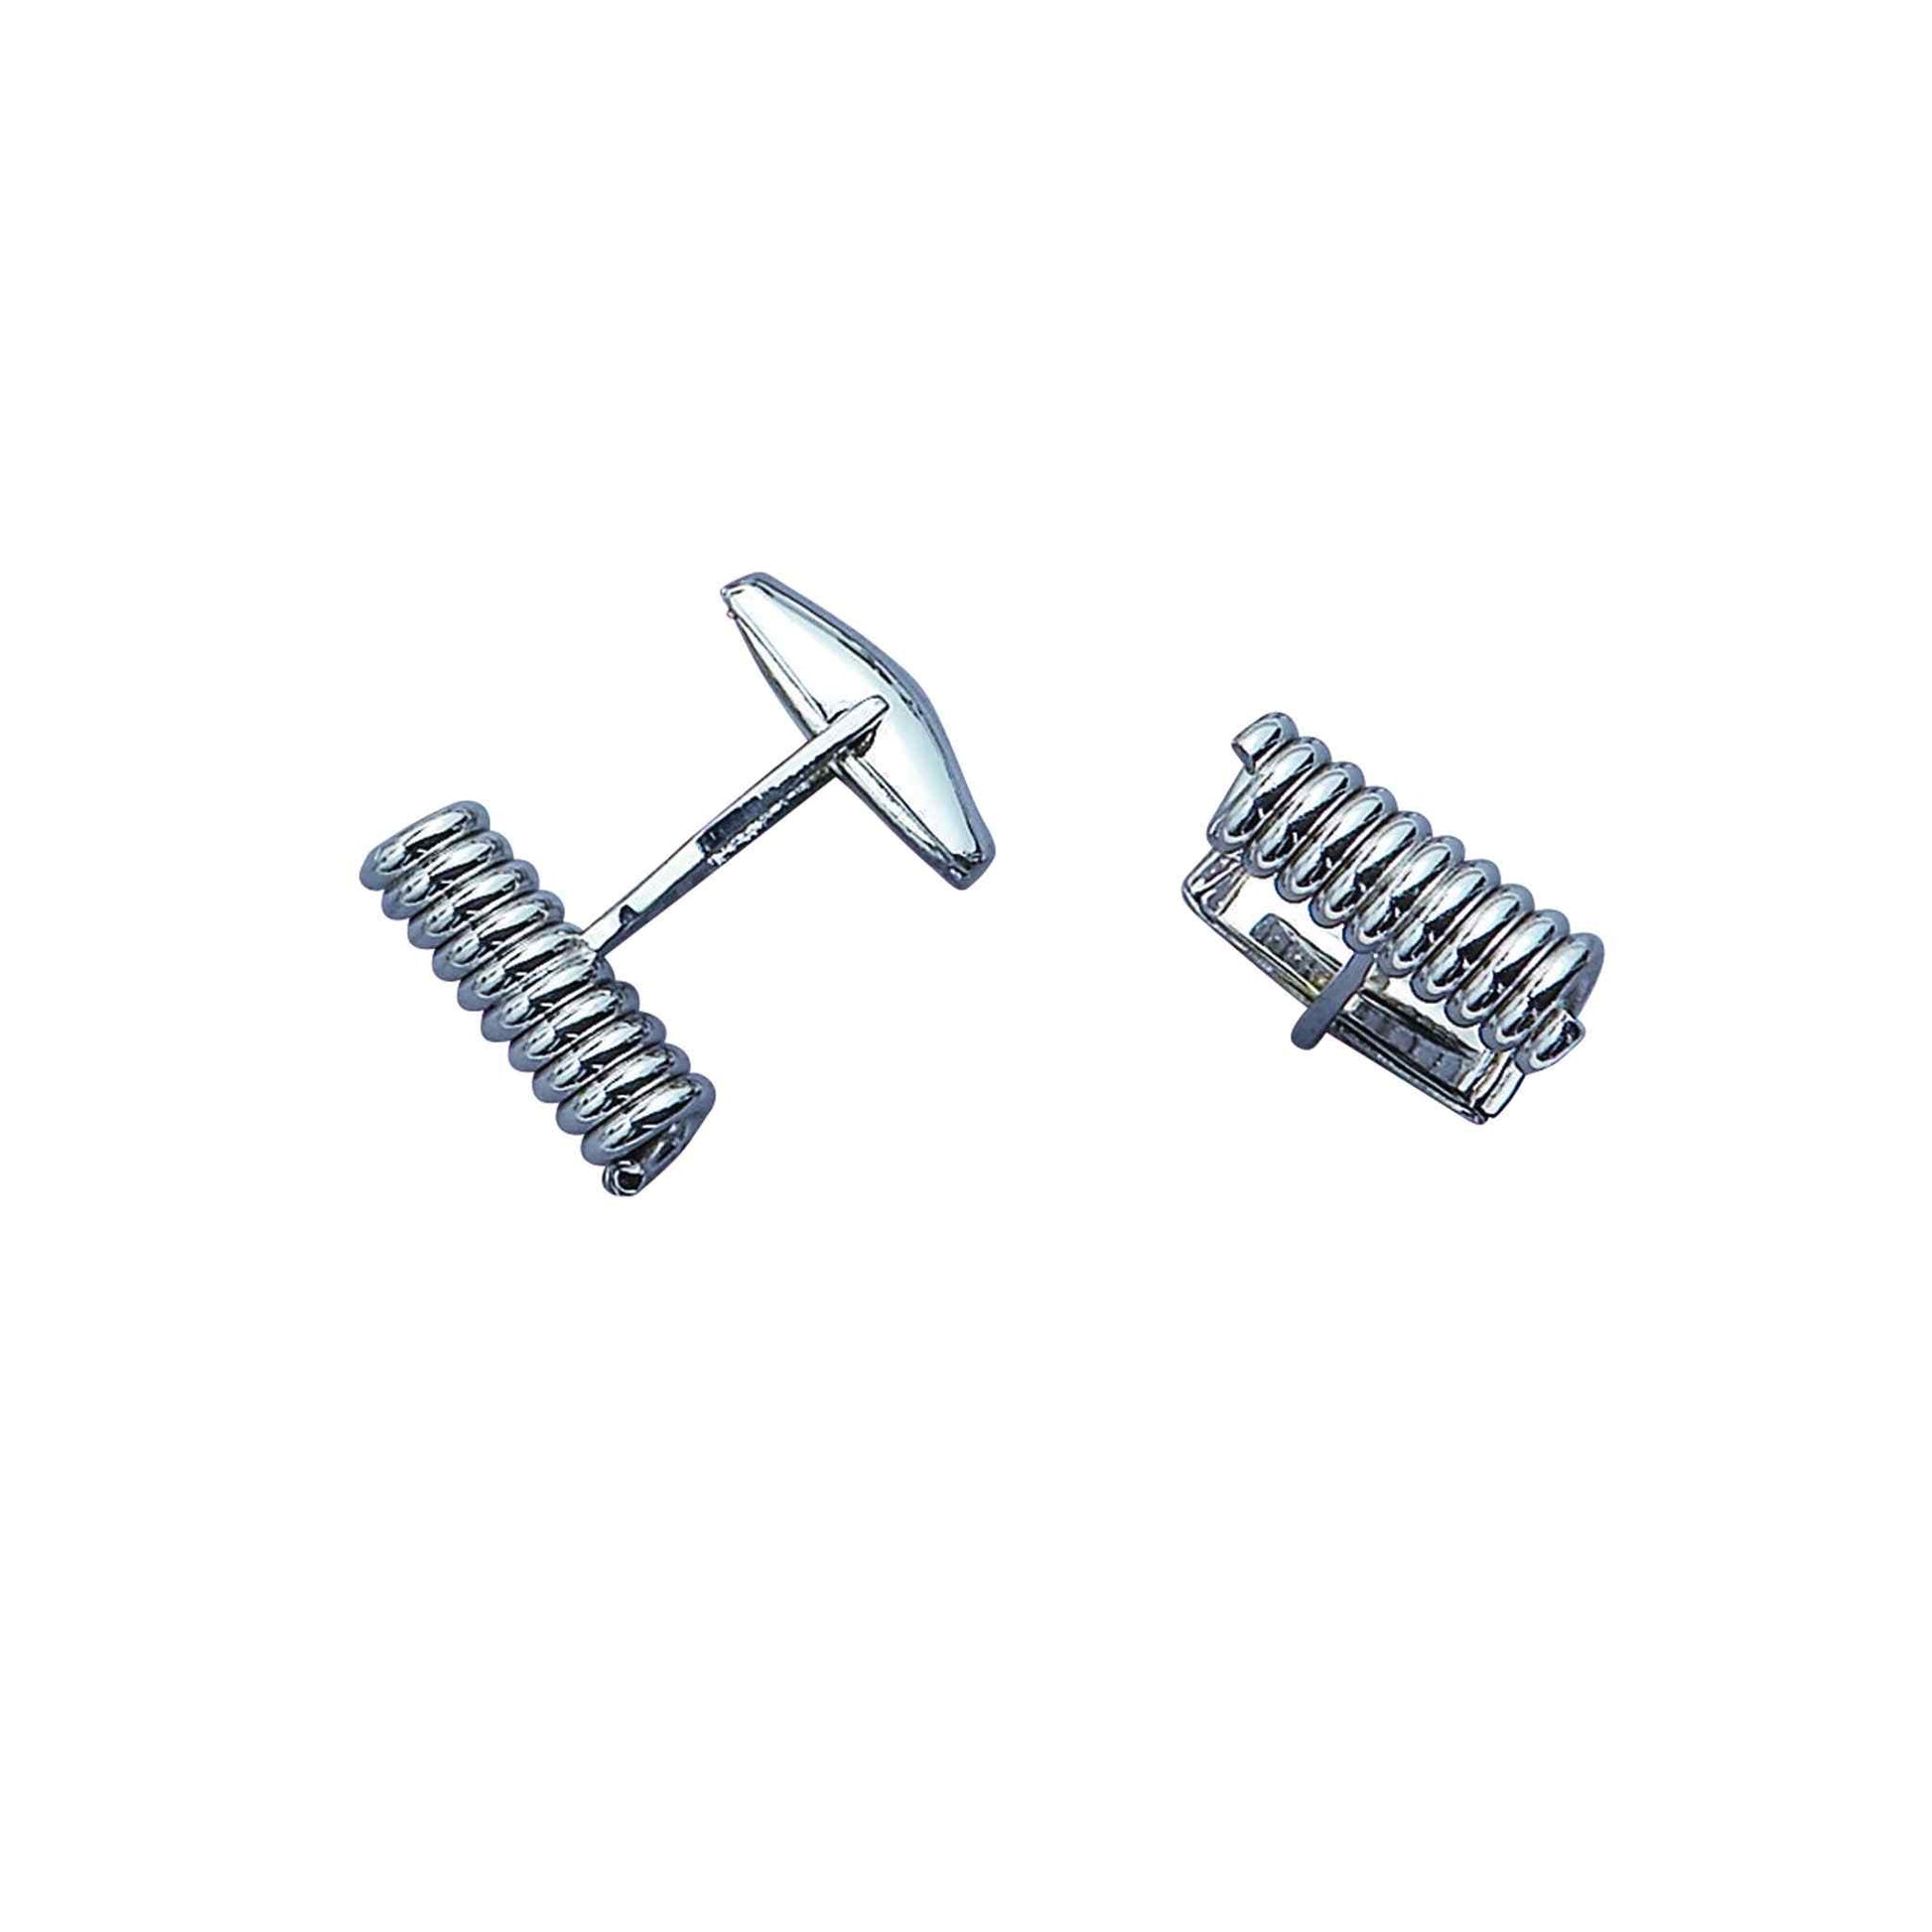 A 14k white gold coil cufflinks displayed on a neutral white background.